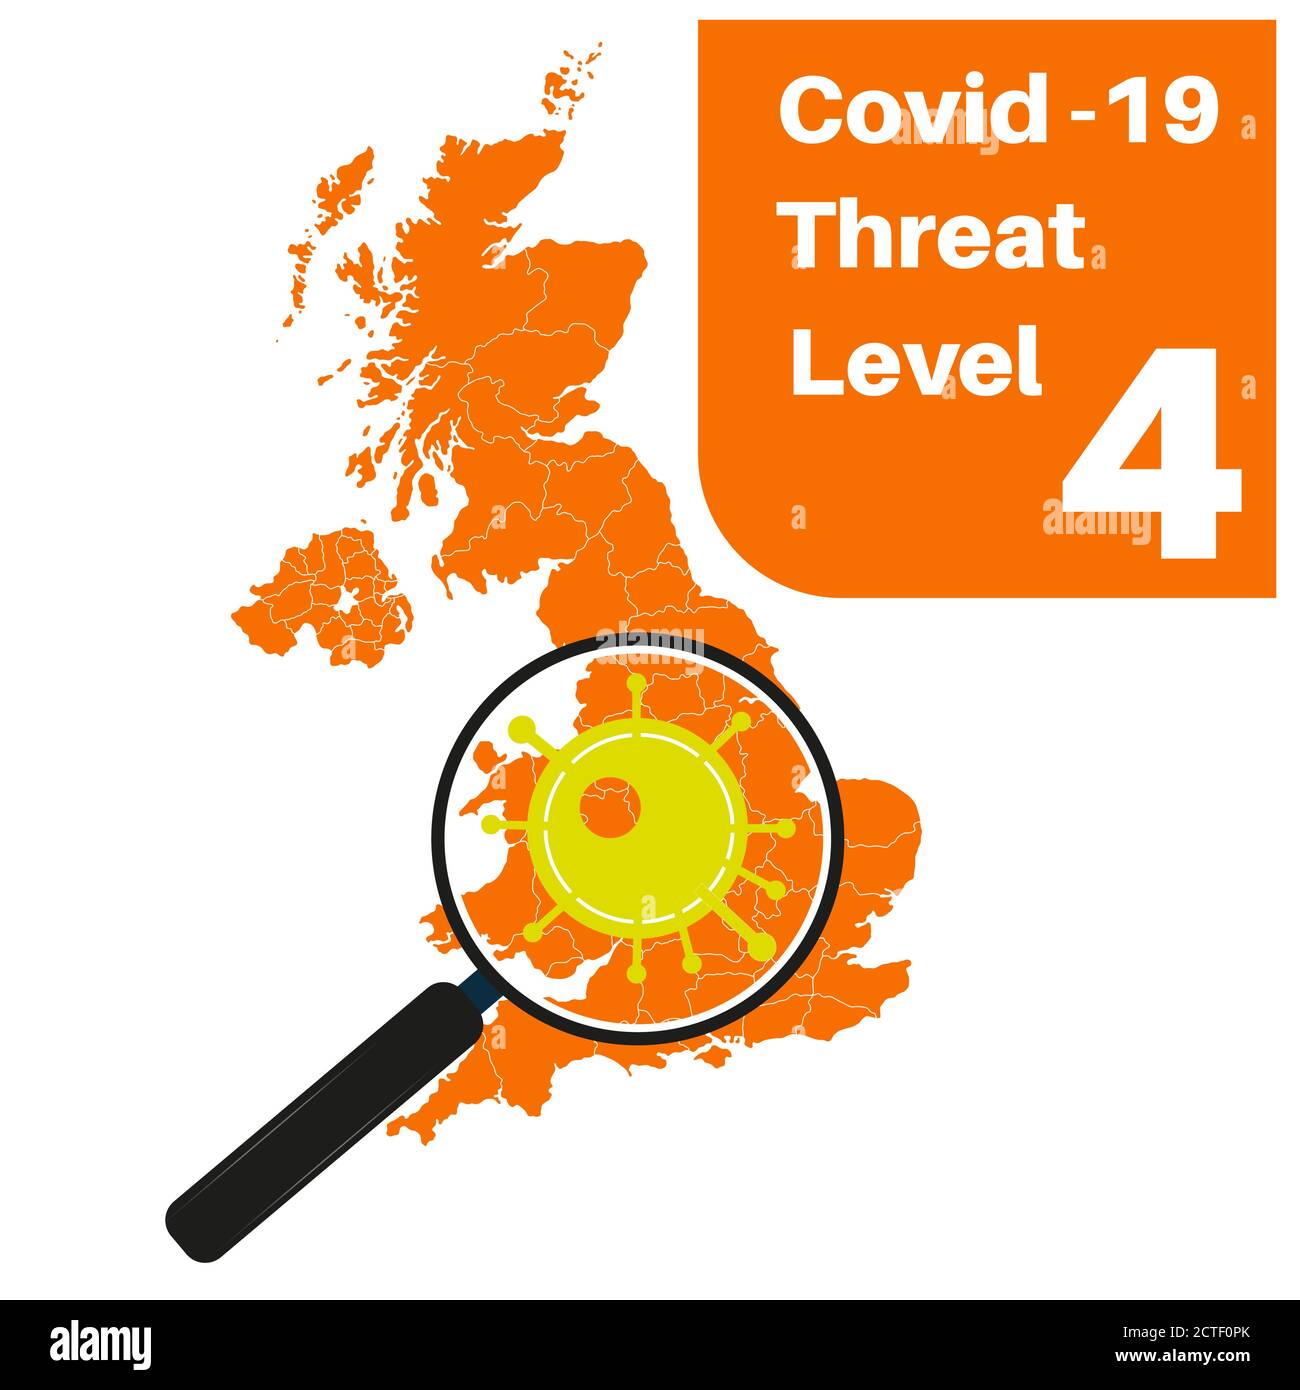 Covid-19 UK Threat Level 5 (Amber) with map and magnifying glass Stock Vector